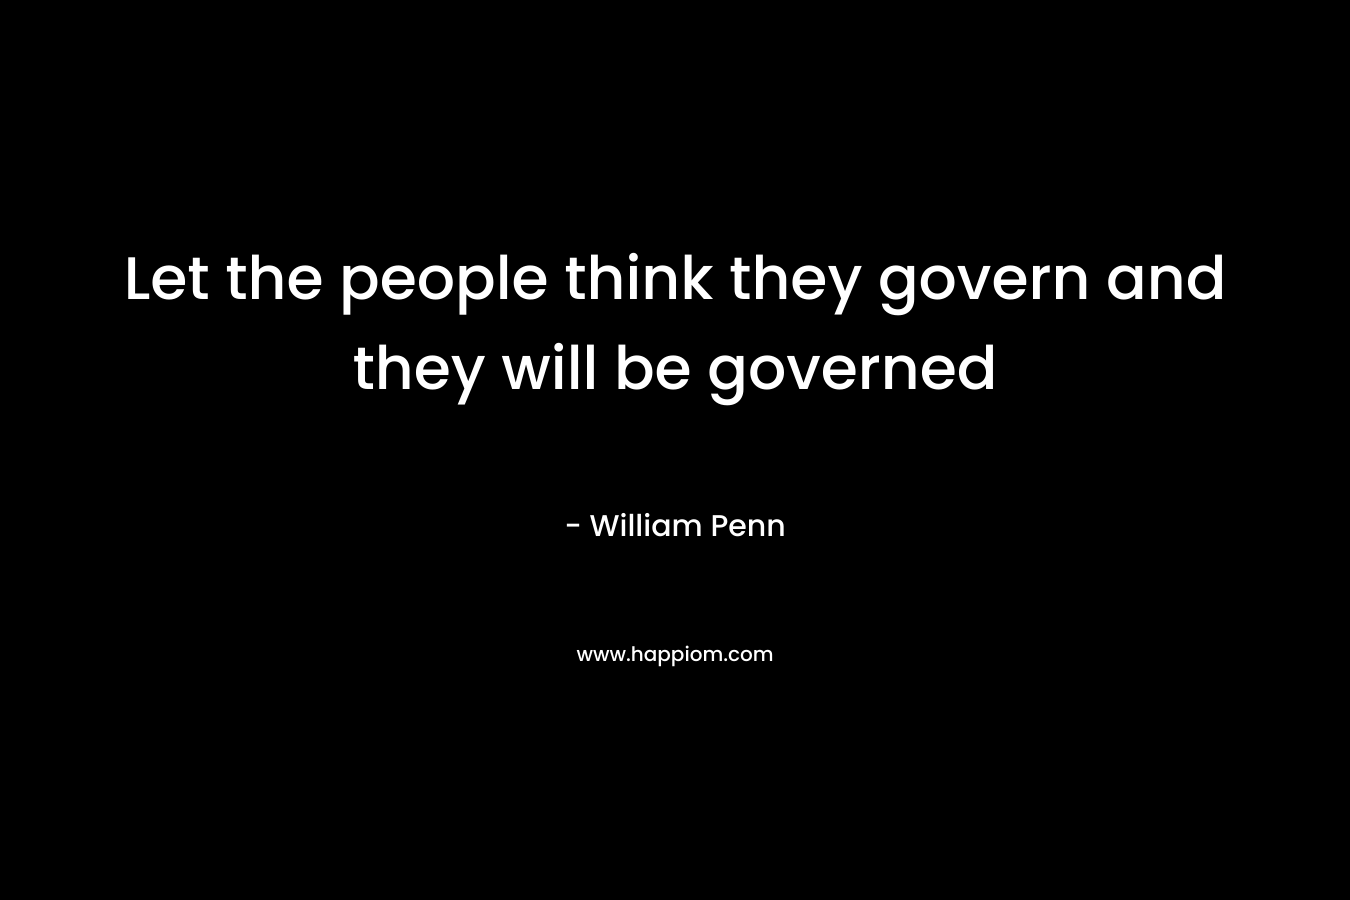 Let the people think they govern and they will be governed